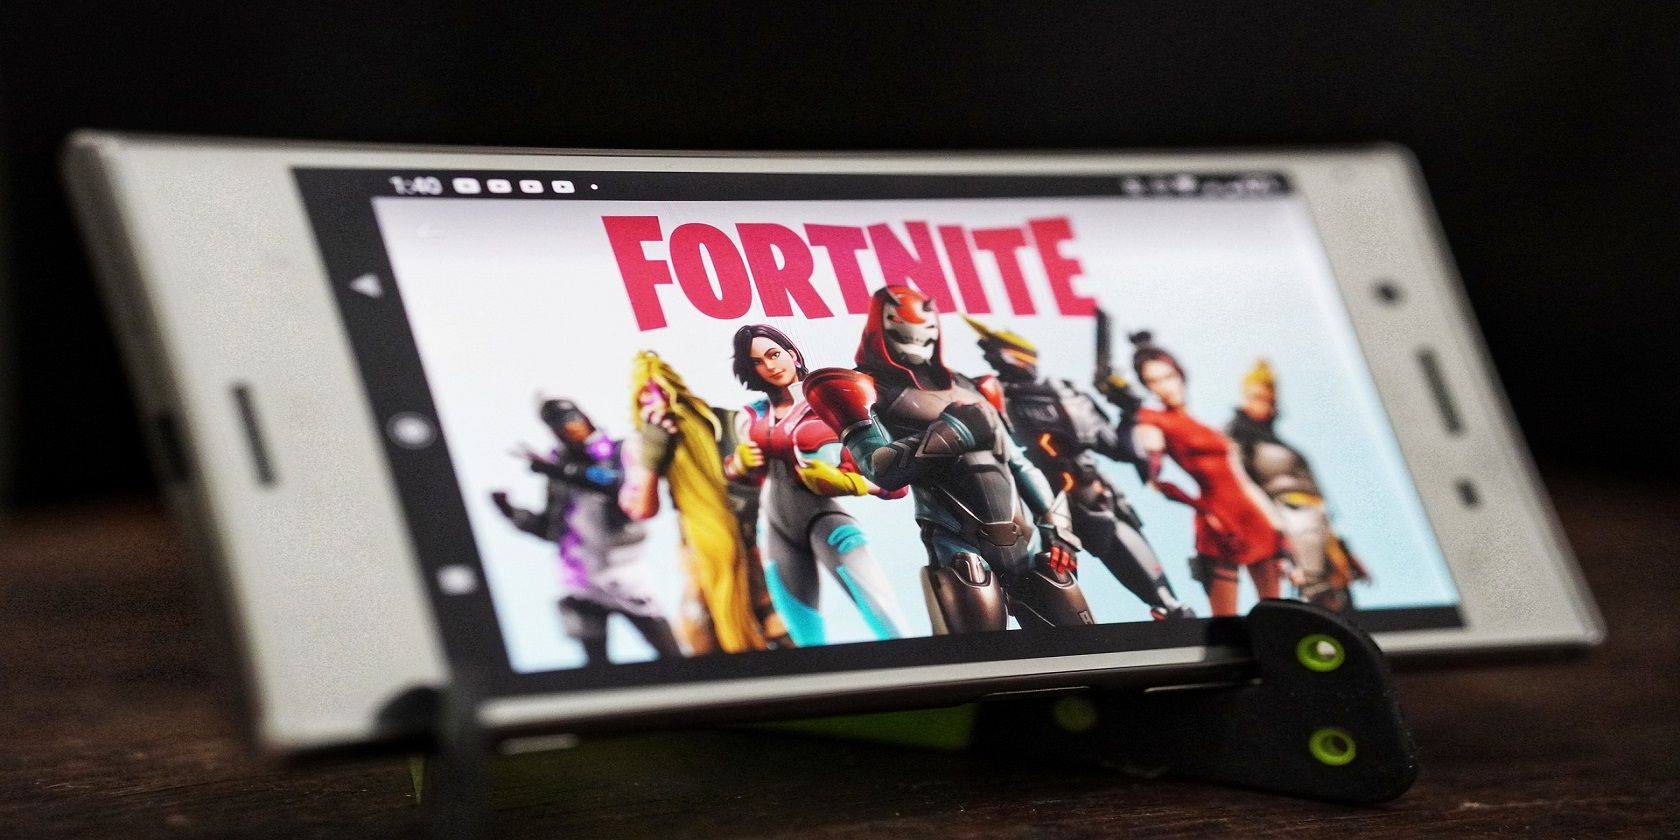 Fortnite logo and characters on mobile phone screen